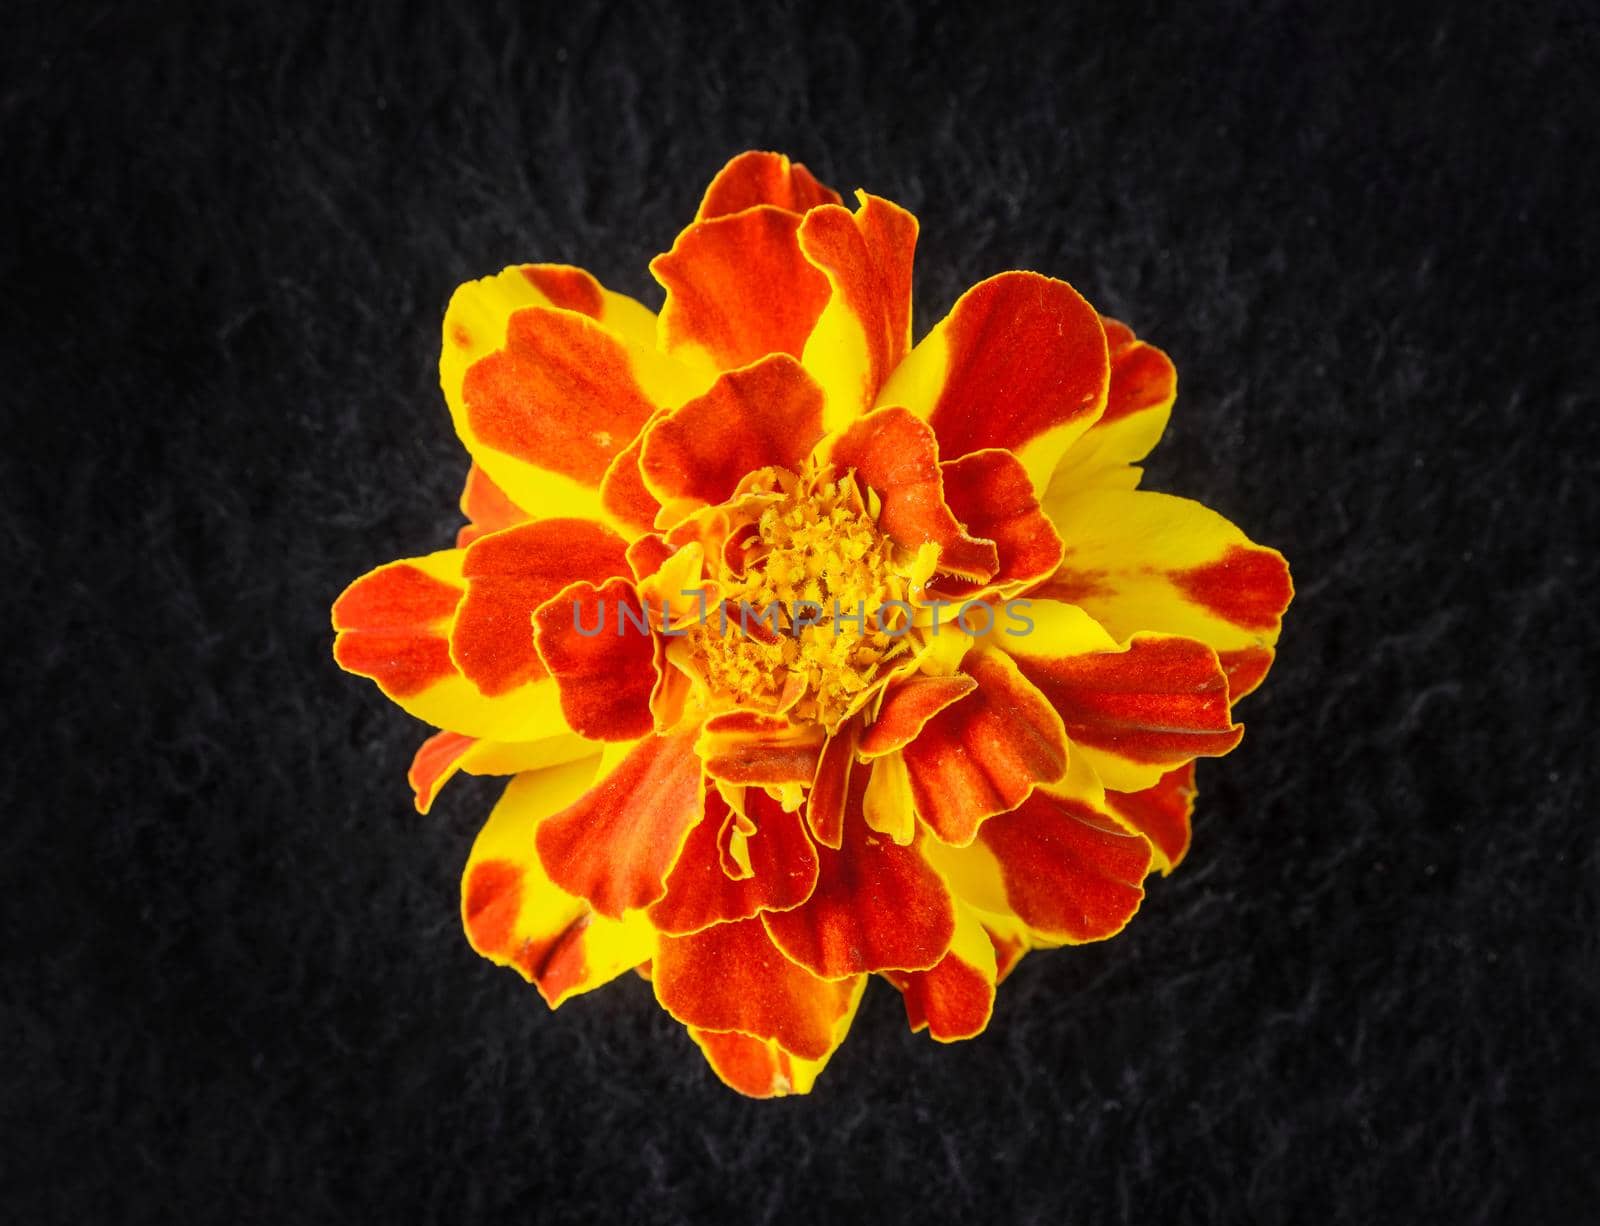 Top view of a flower on a black background. Studio shot. by Proff